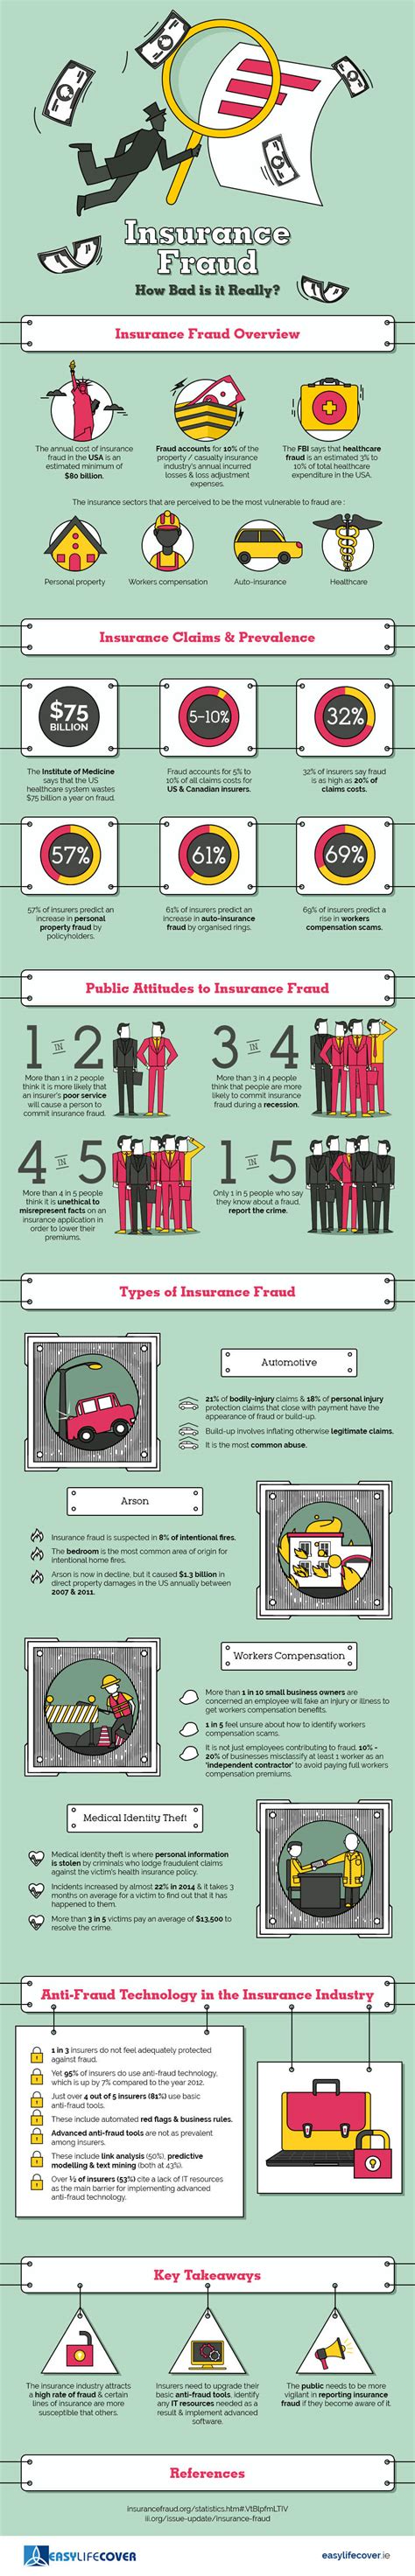 In this circumstance, 2 or 3 vehicles work together to cause ultimately, every major insurance company loses money to fraud on a daily basis. Insurance Fraud, How Bad is it Really? INFOGRAPHIC